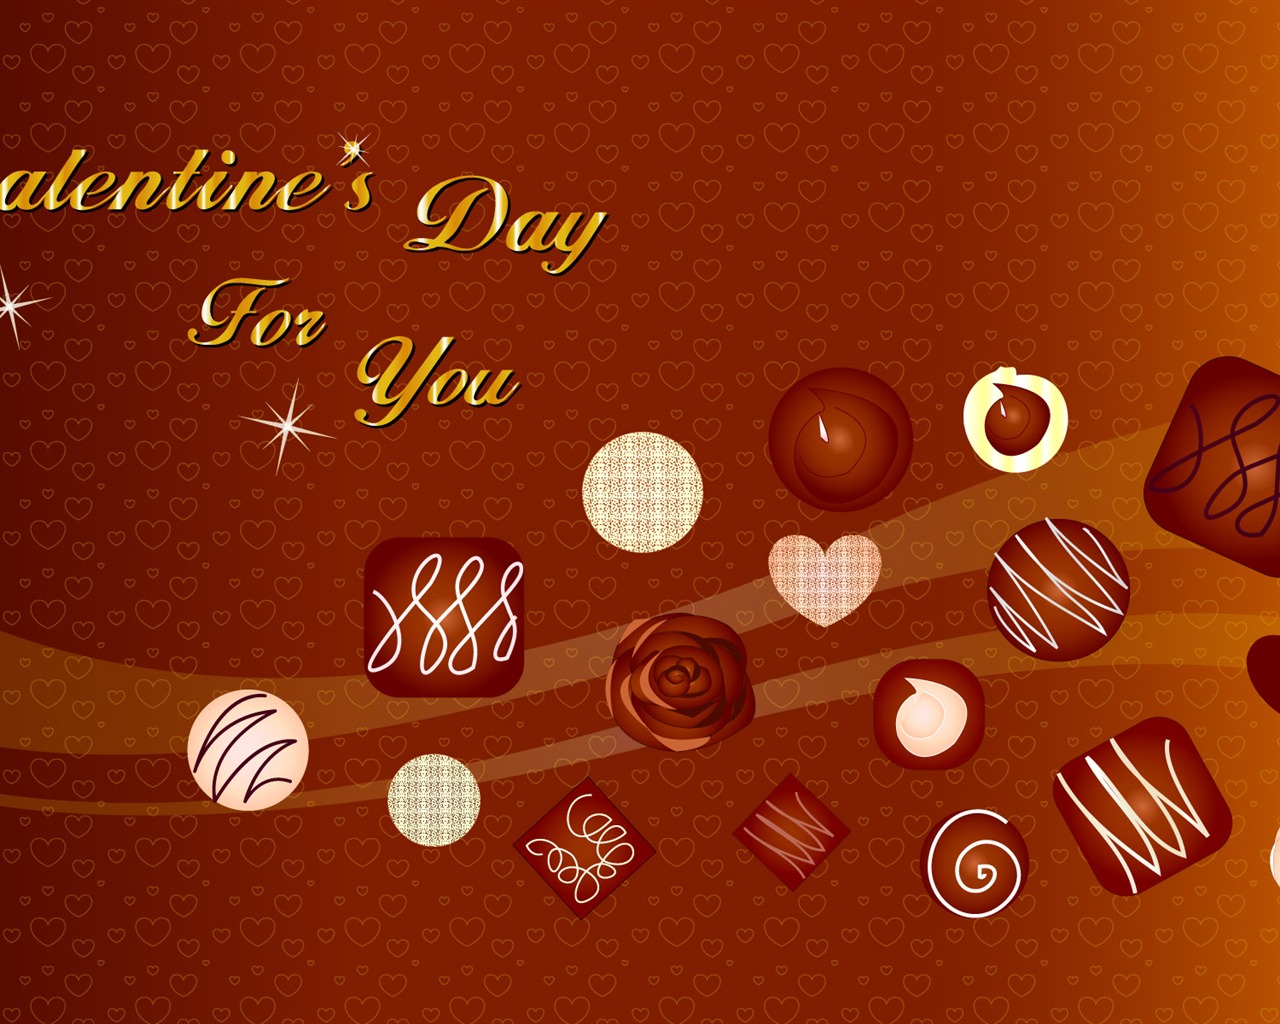 Valentine's Day Theme Wallpapers (1) #3 - 1280x1024